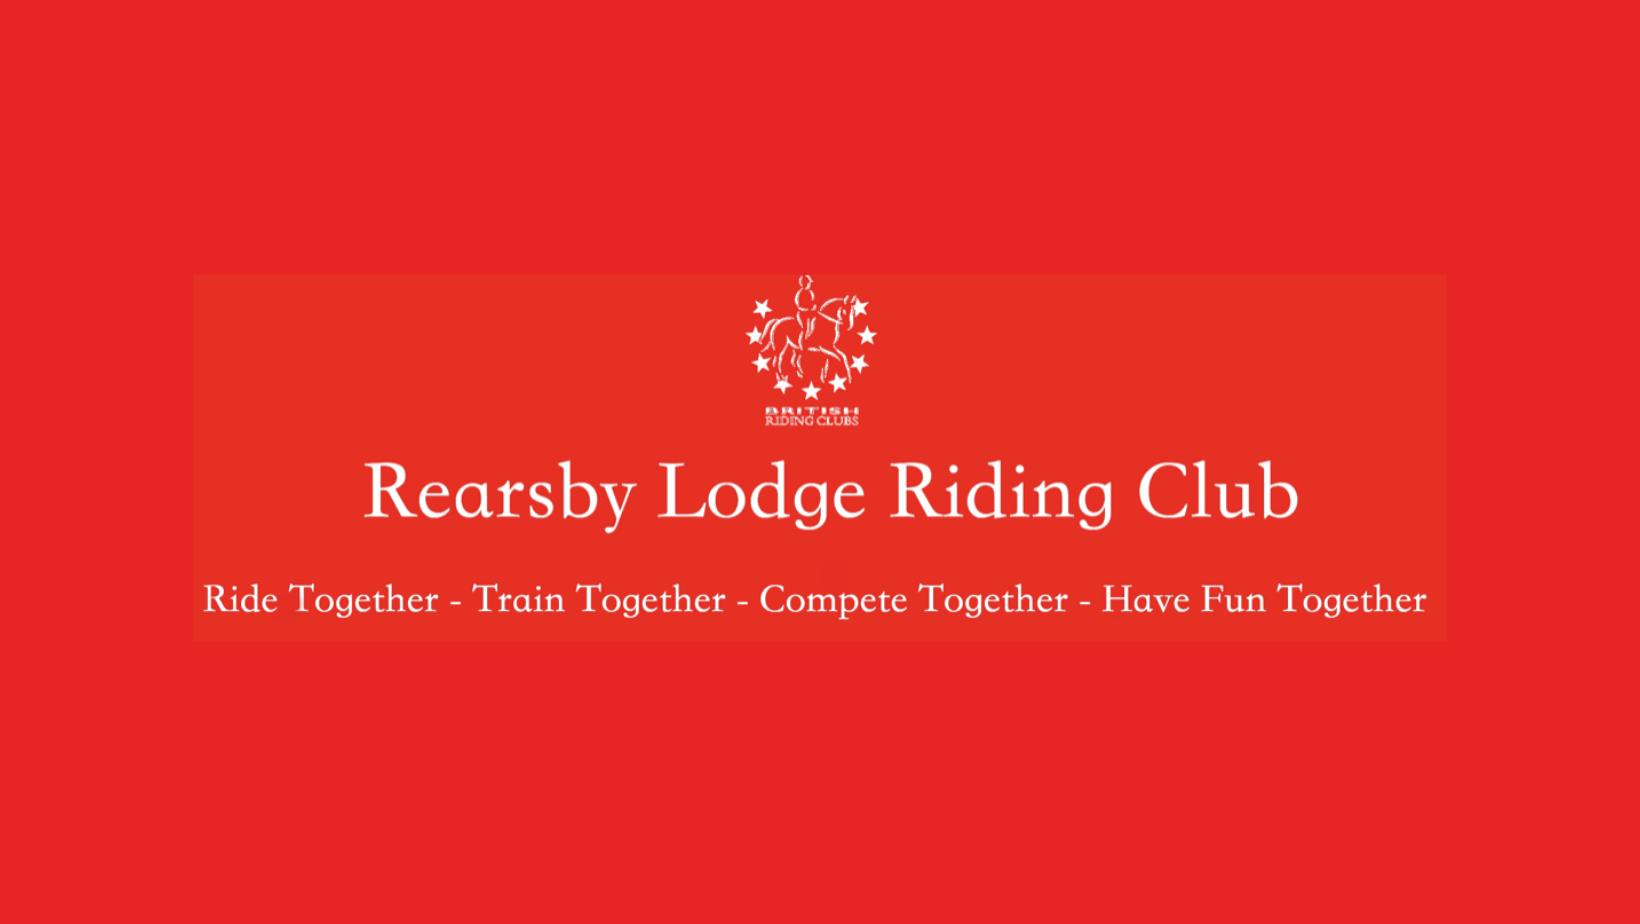 Rearsby Lodge Riding Club in Leicestershire